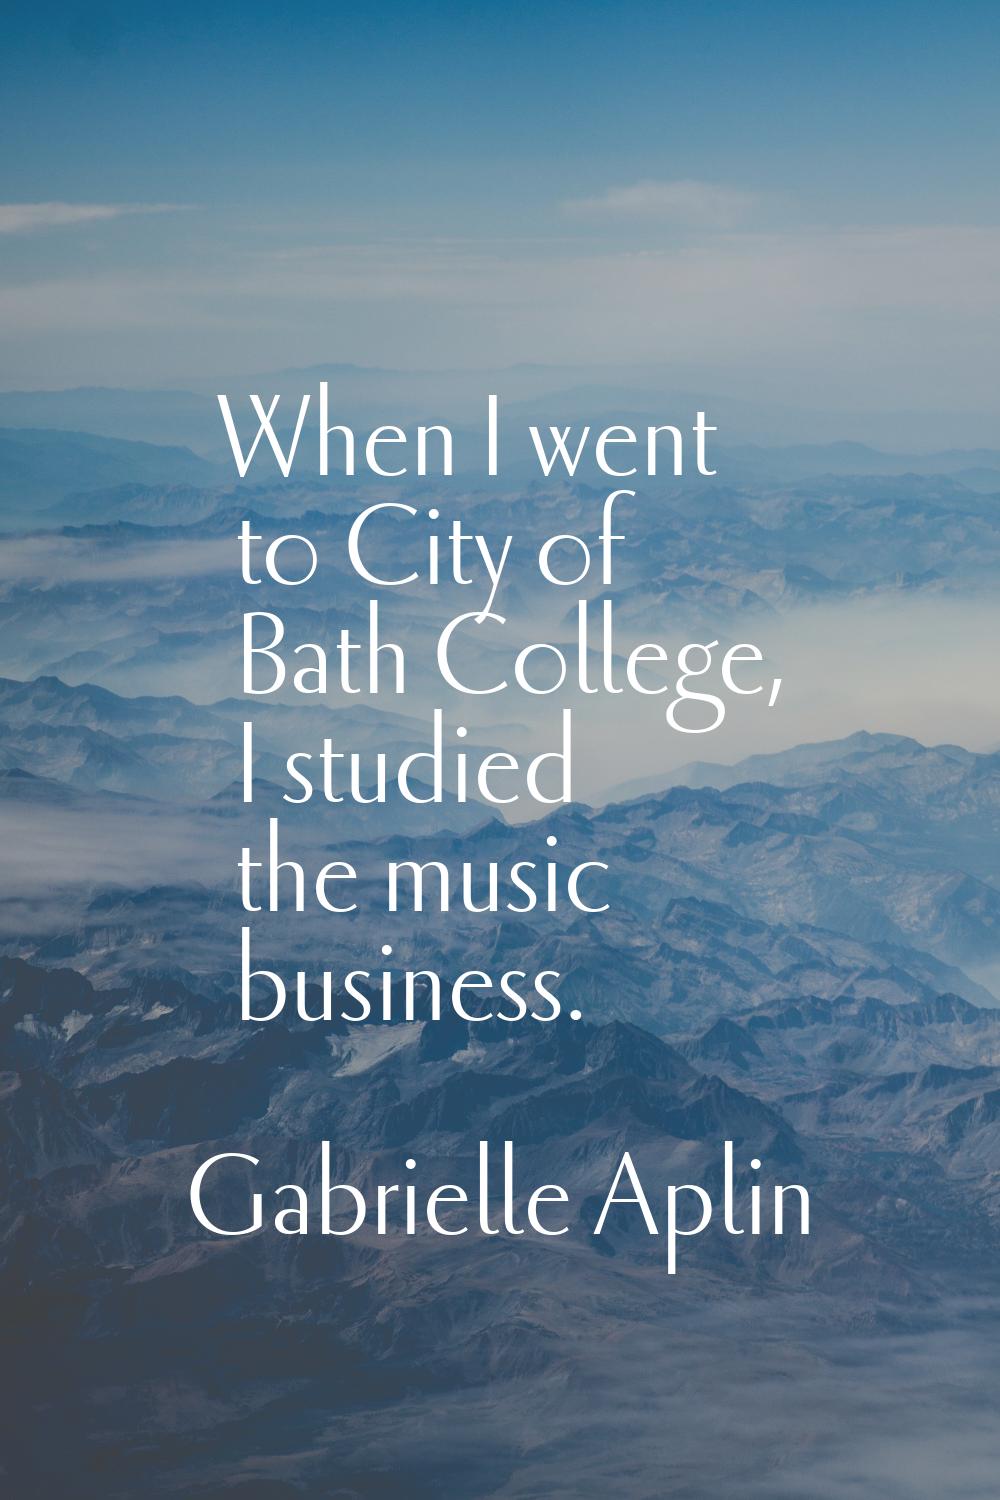 When I went to City of Bath College, I studied the music business.